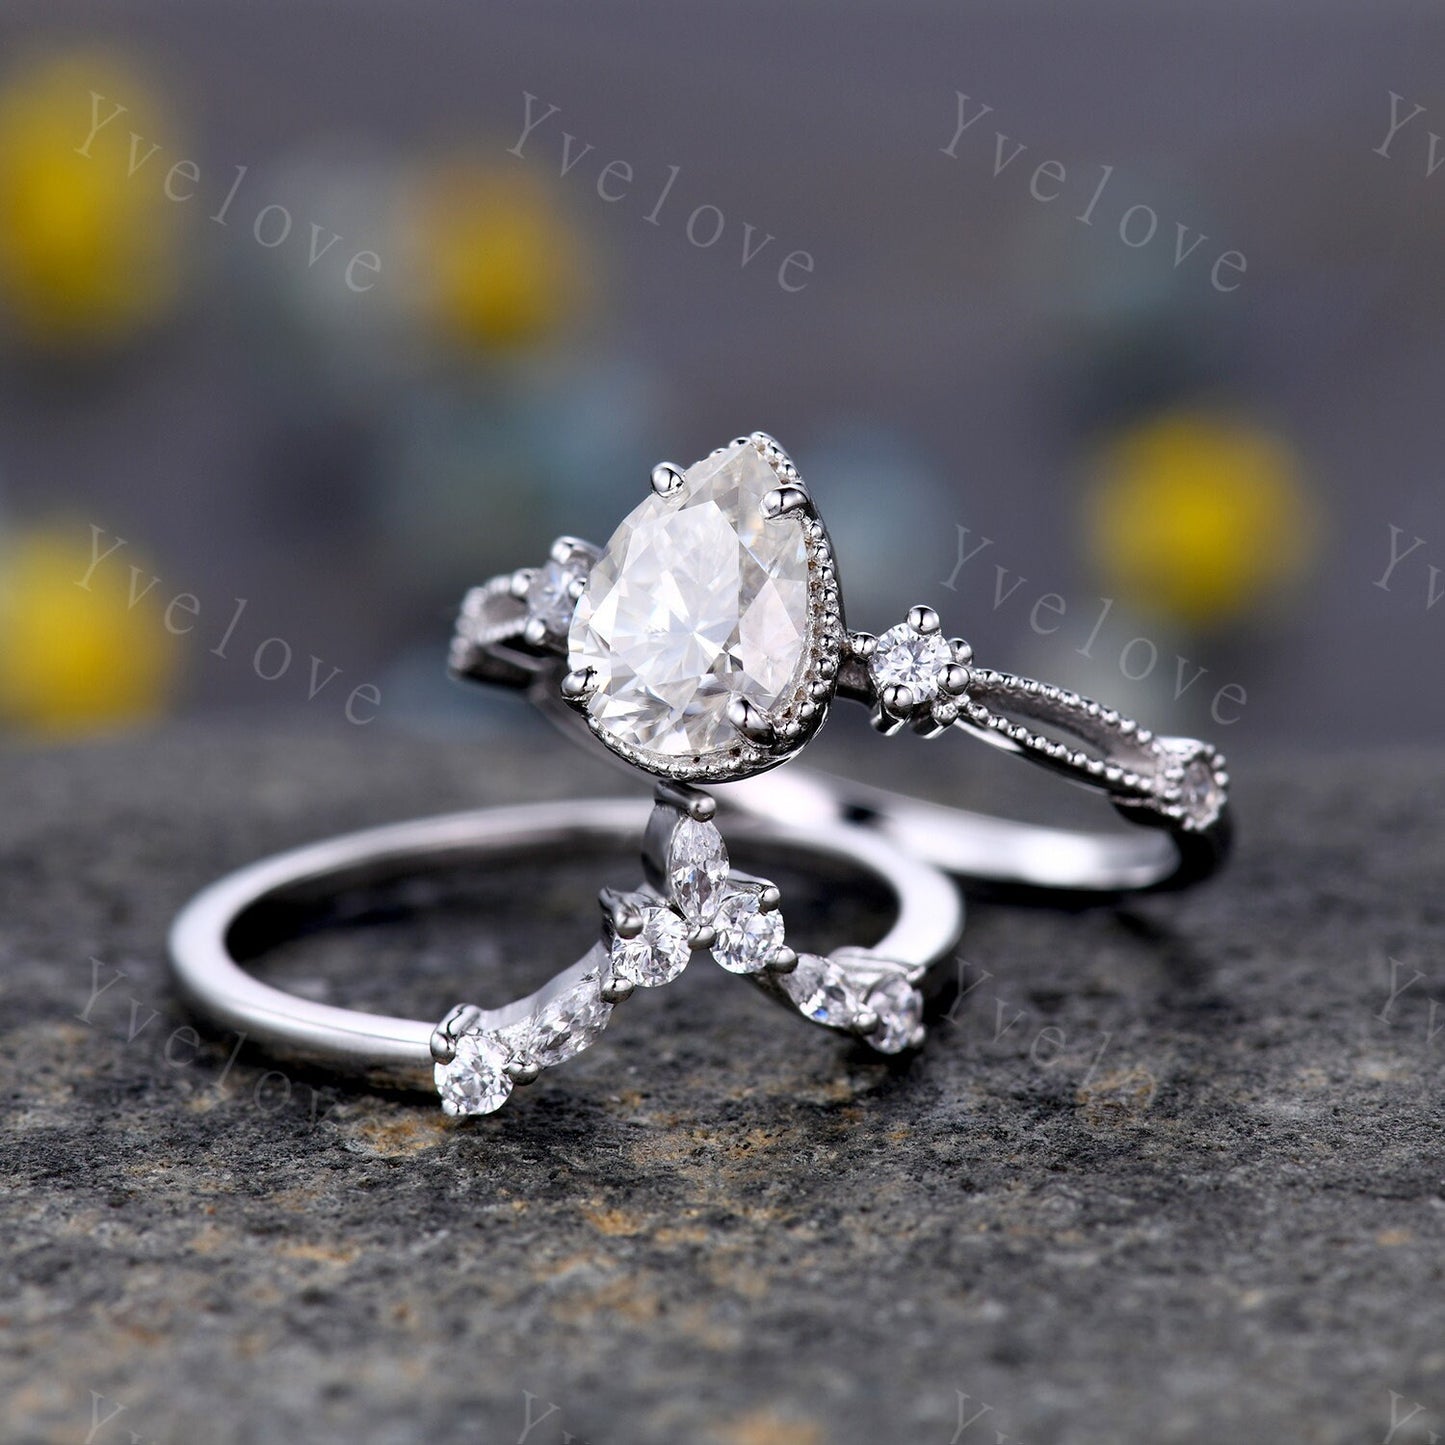 Pear moissanite engagement ring set white gold vintage engagement ring unique cluster marquise diamond wedding anniversary women ring set